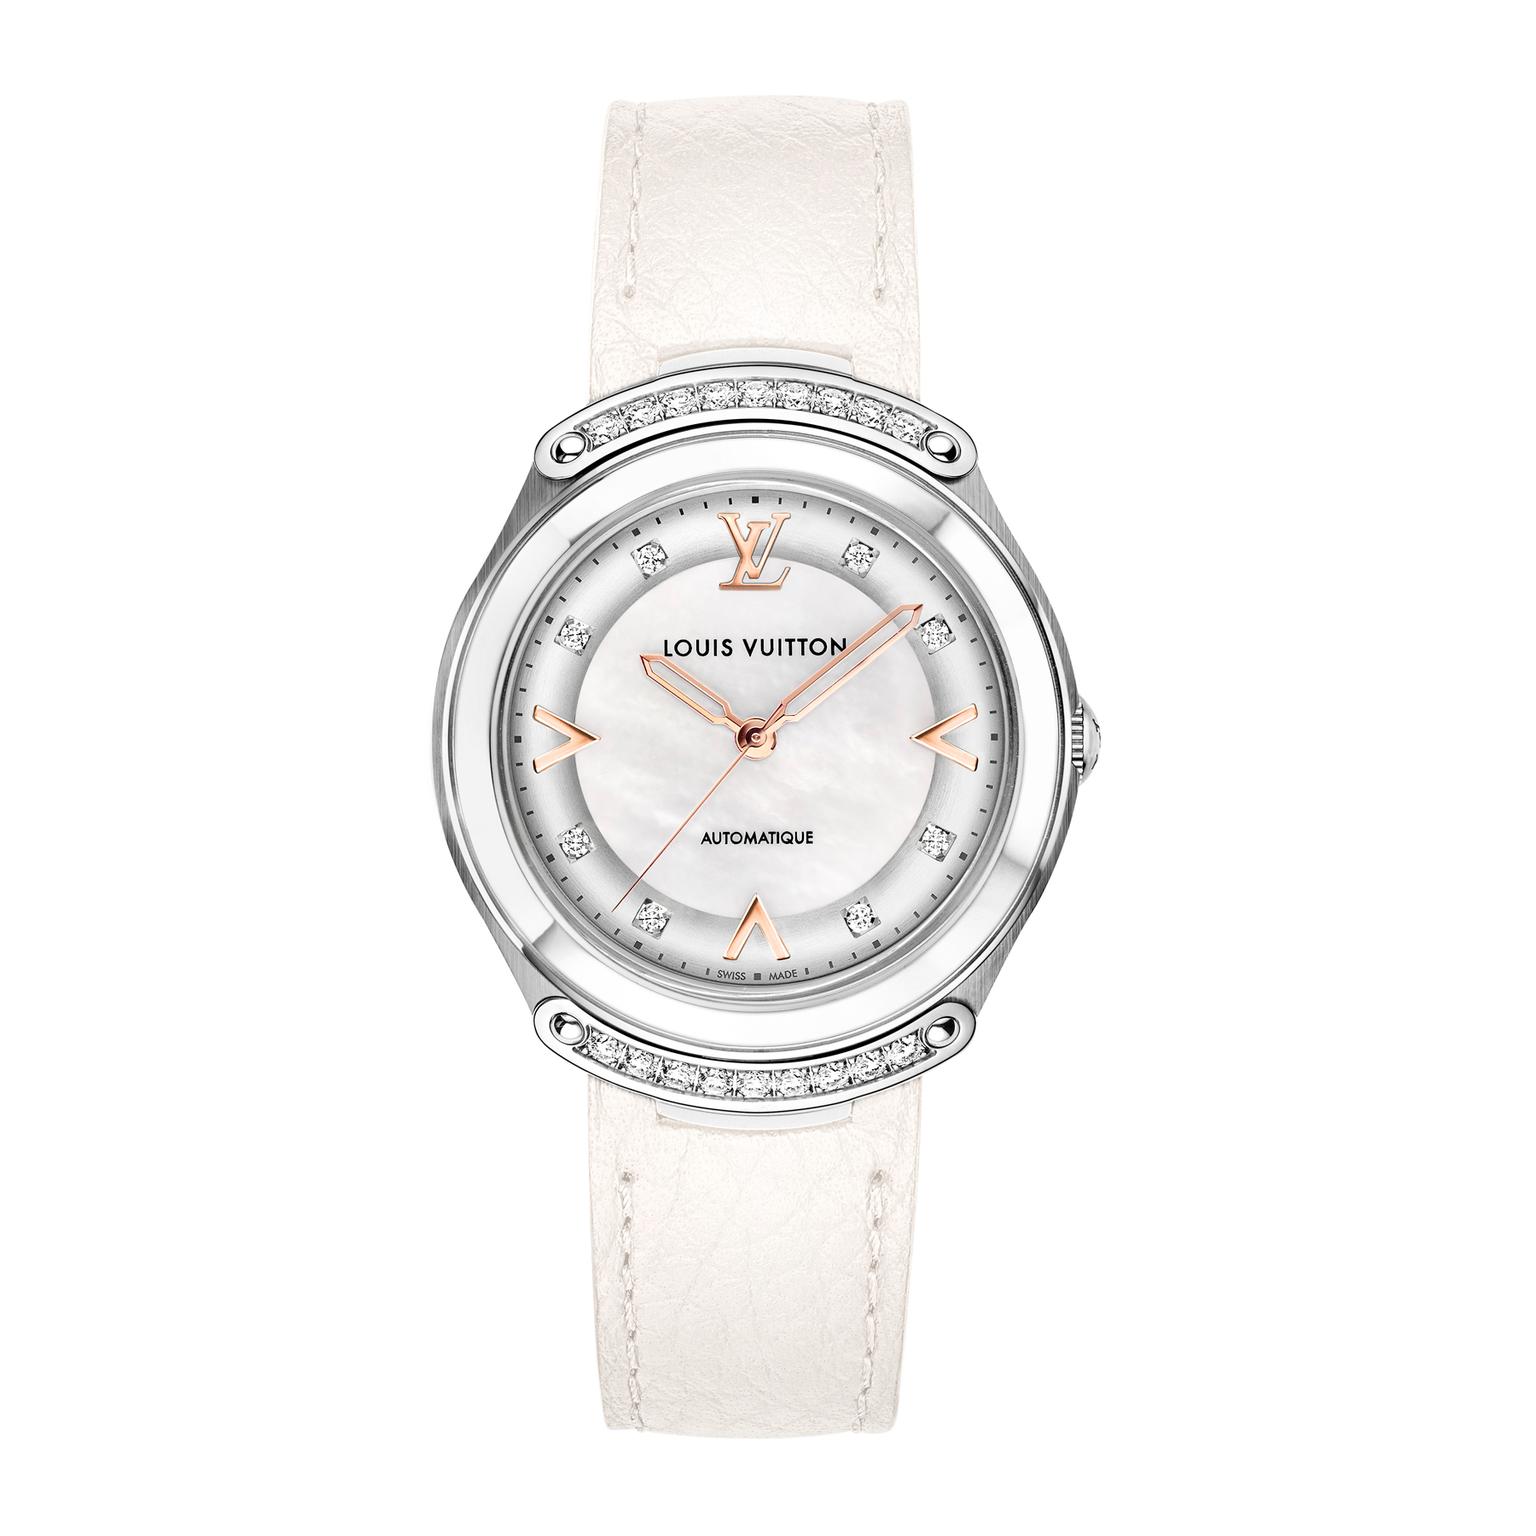 Lv Louis vuitton fashion womens stainless watch